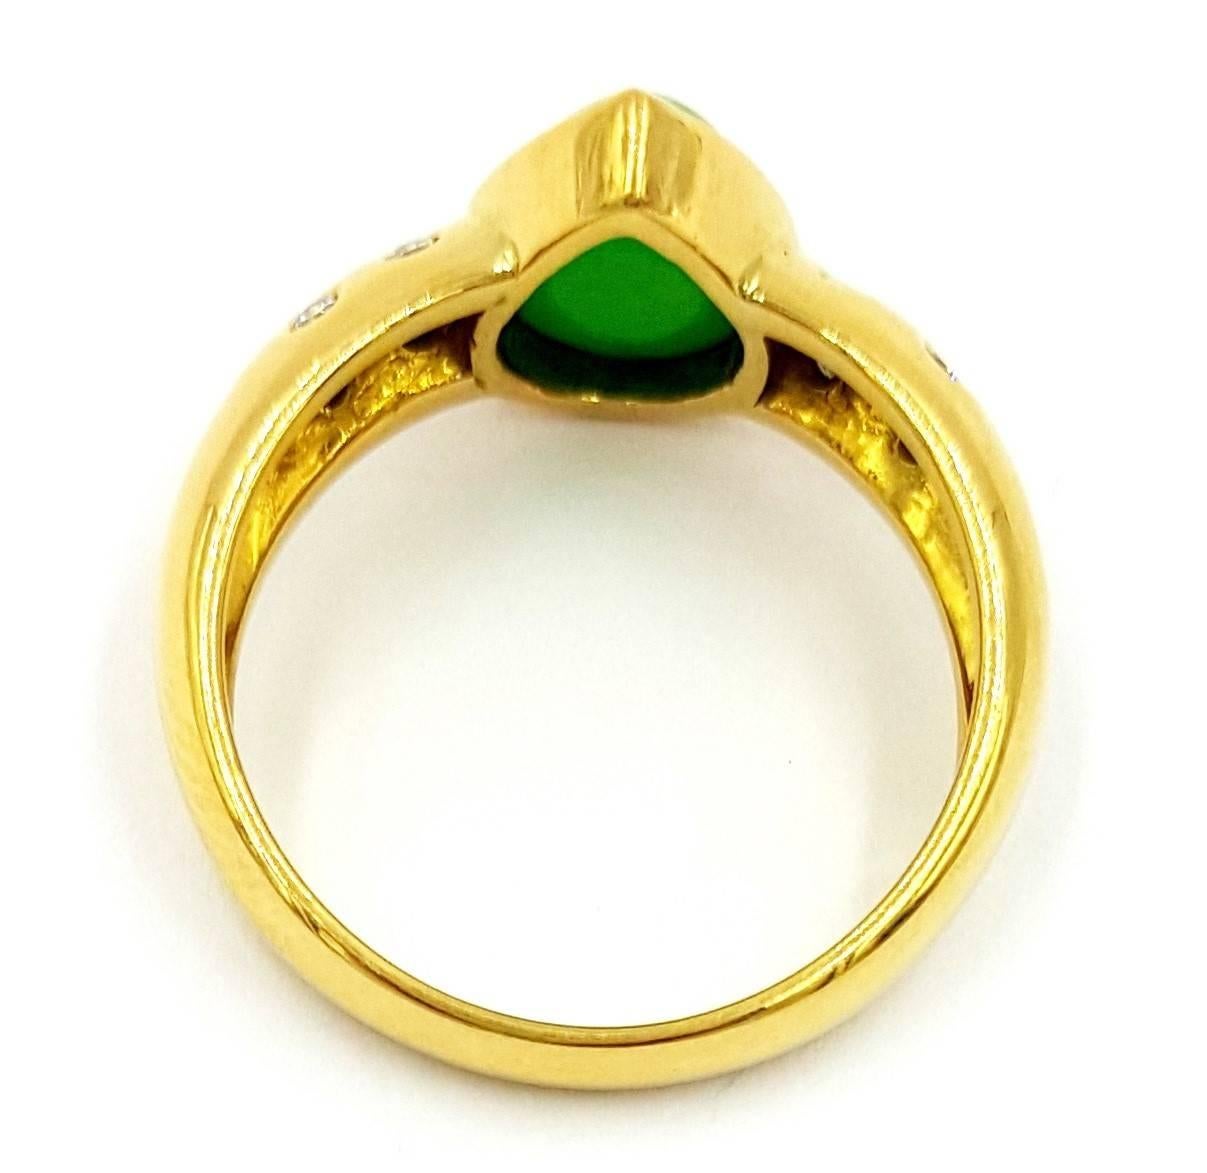 Superb Natural Untreated 1.25 Carat Pear Shape Cabochon Jade Diamond Gold Ring For Sale 1